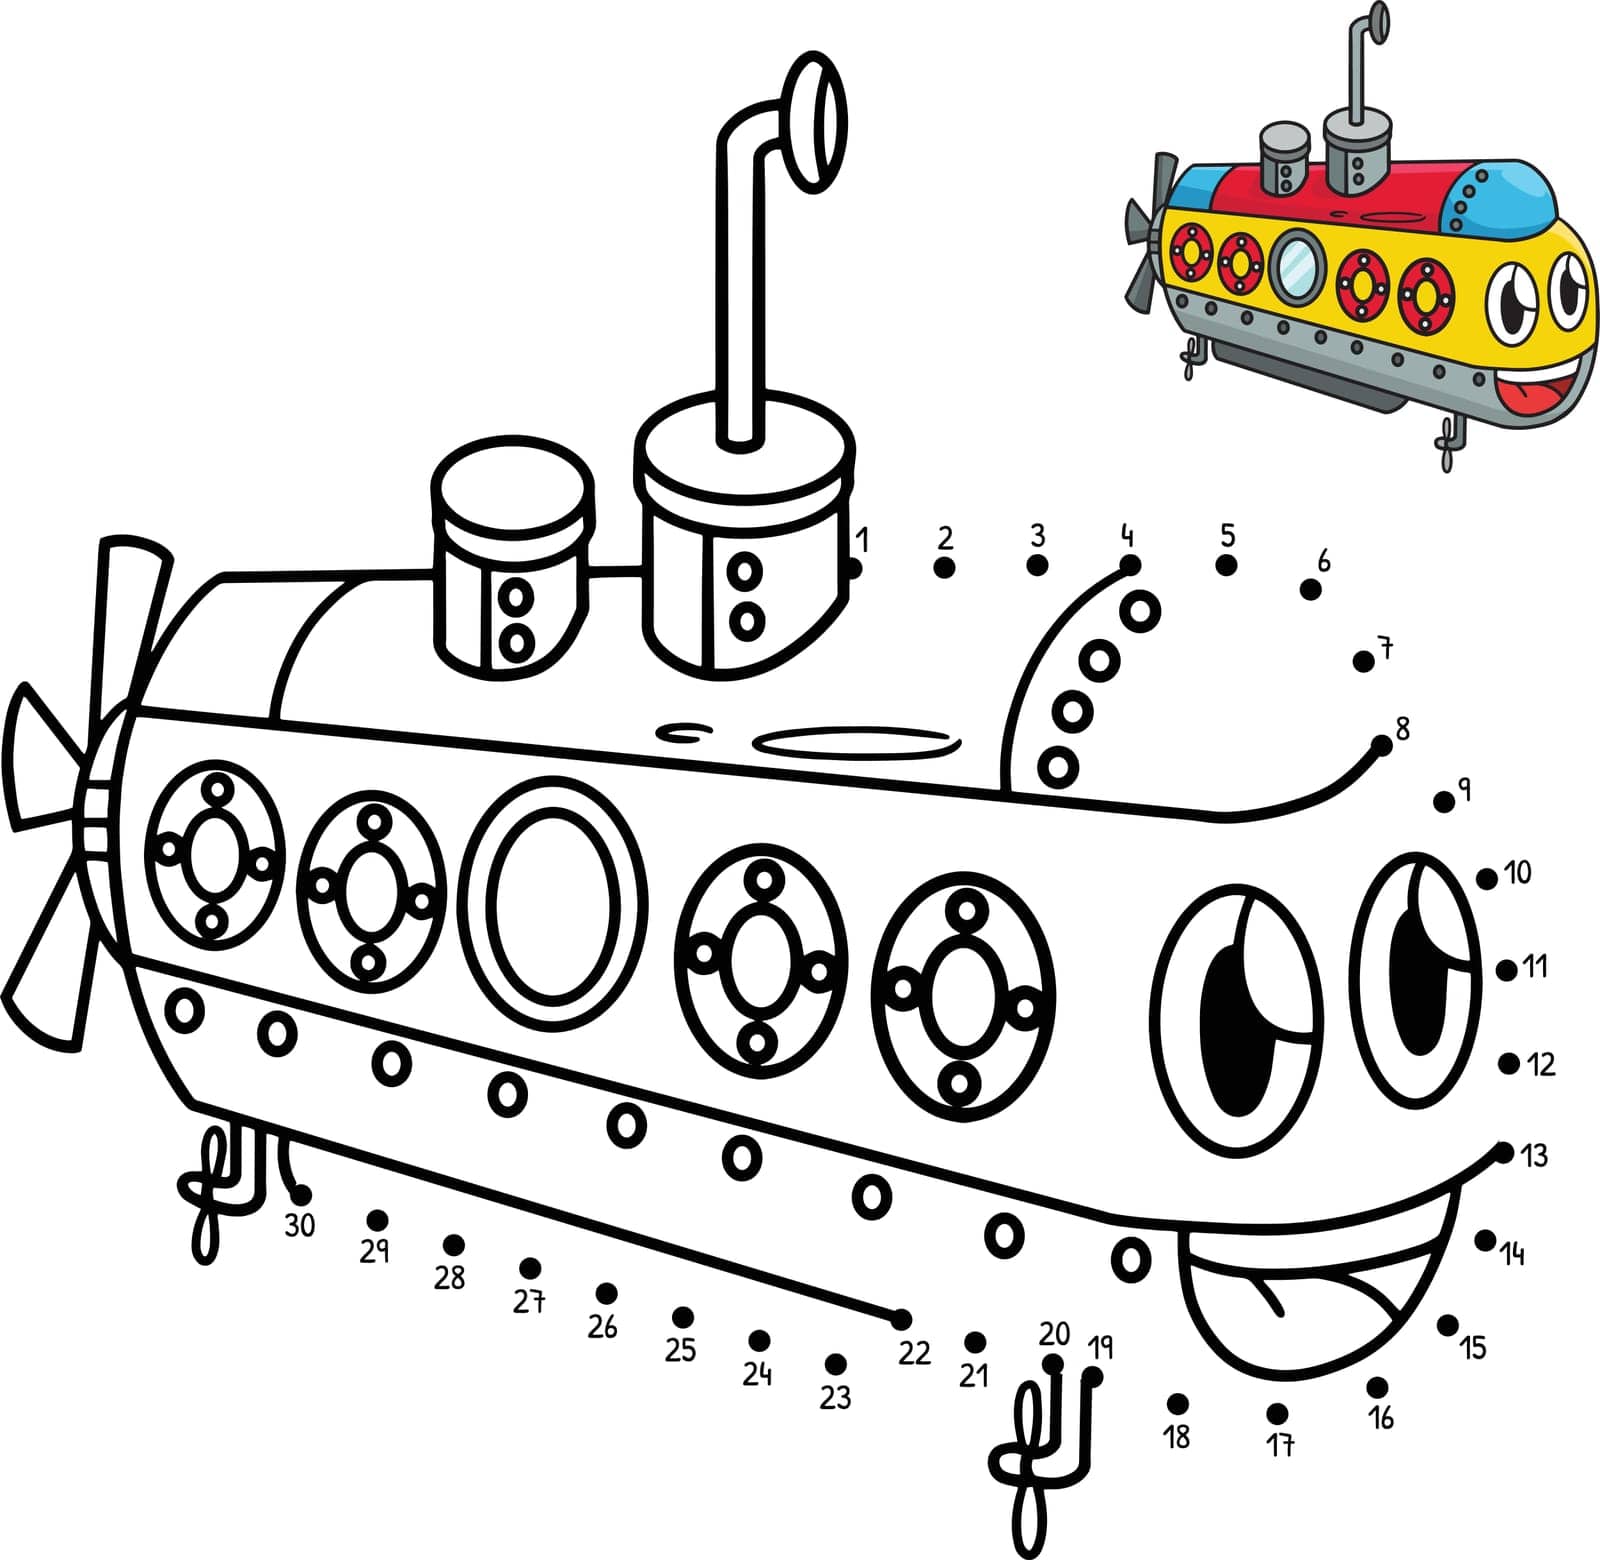 A cute and funny connect the dots Submarine with Face Vehicle coloring page.